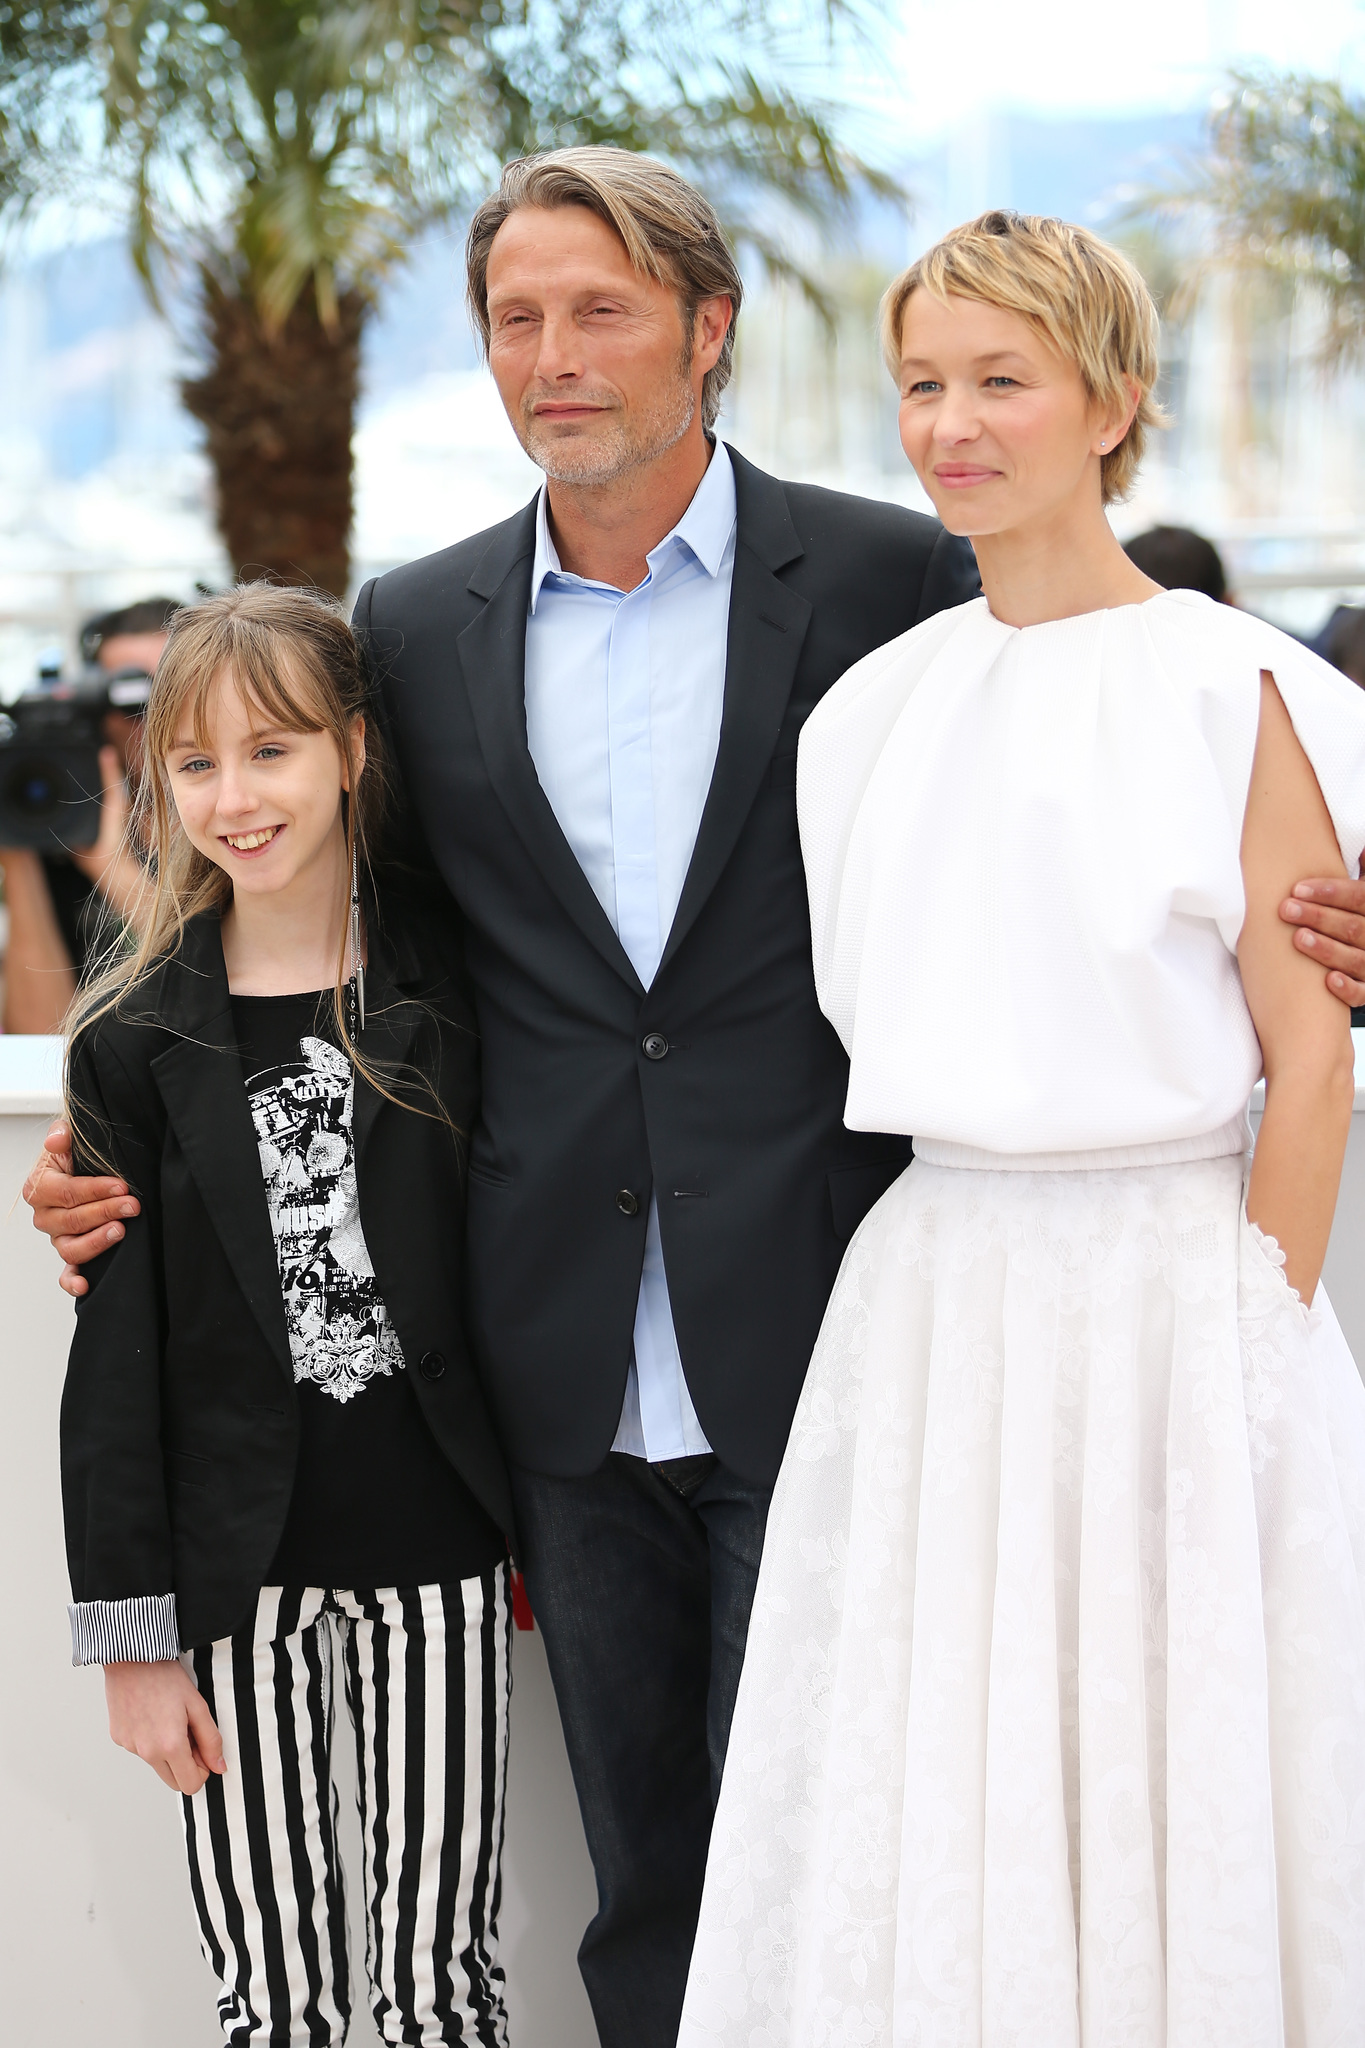 Delphine Chuillot, Mads Mikkelsen and Mélusine Mayance at event of Michael Kohlhaas (2013)